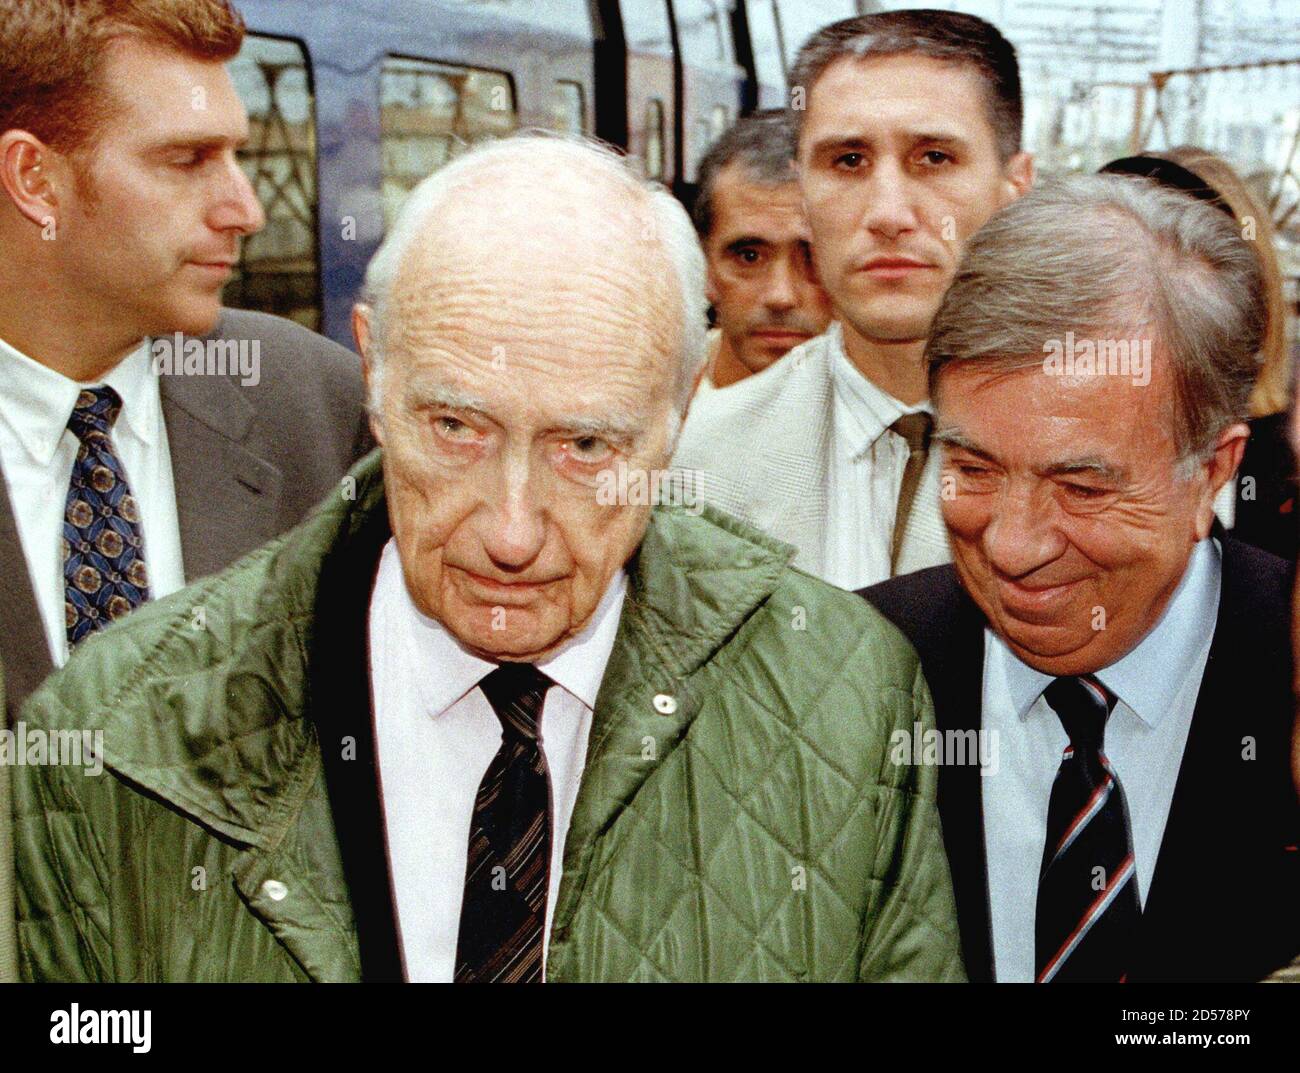 Former French cabinet minister and accused wartime collaborator Maurice  Papon (L) arrives at the train station under tight security with his lawyer  Jean-Marc Varaut (R), as he surrenders to police on the